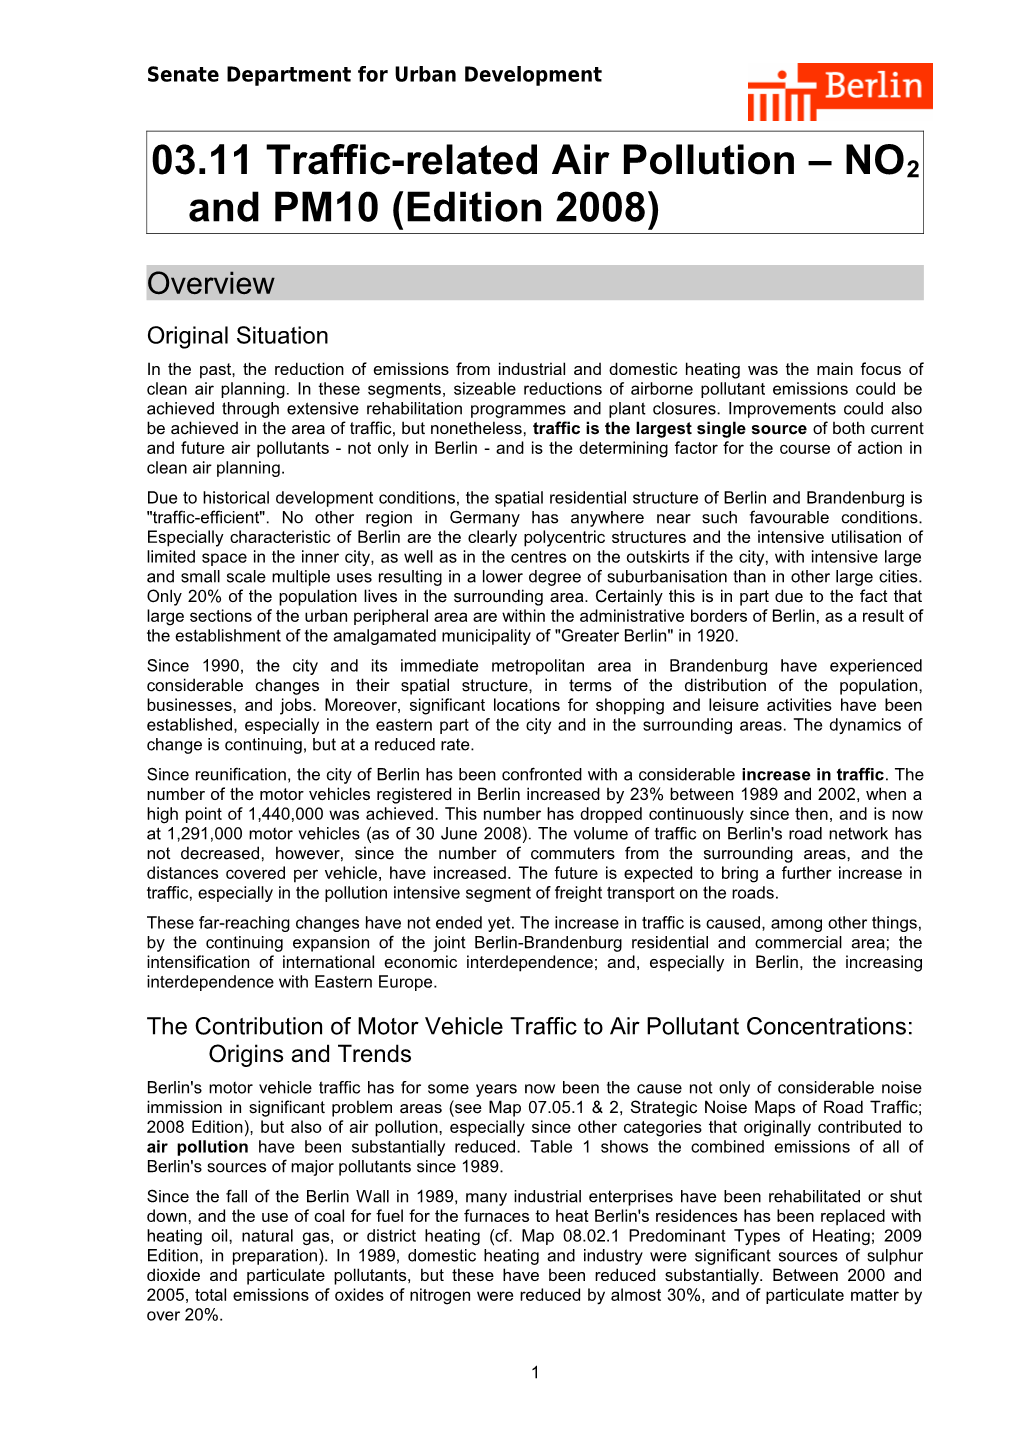 03.11 Traffic-Related Air Pollution NO2 and PM10 (Edition 2008)